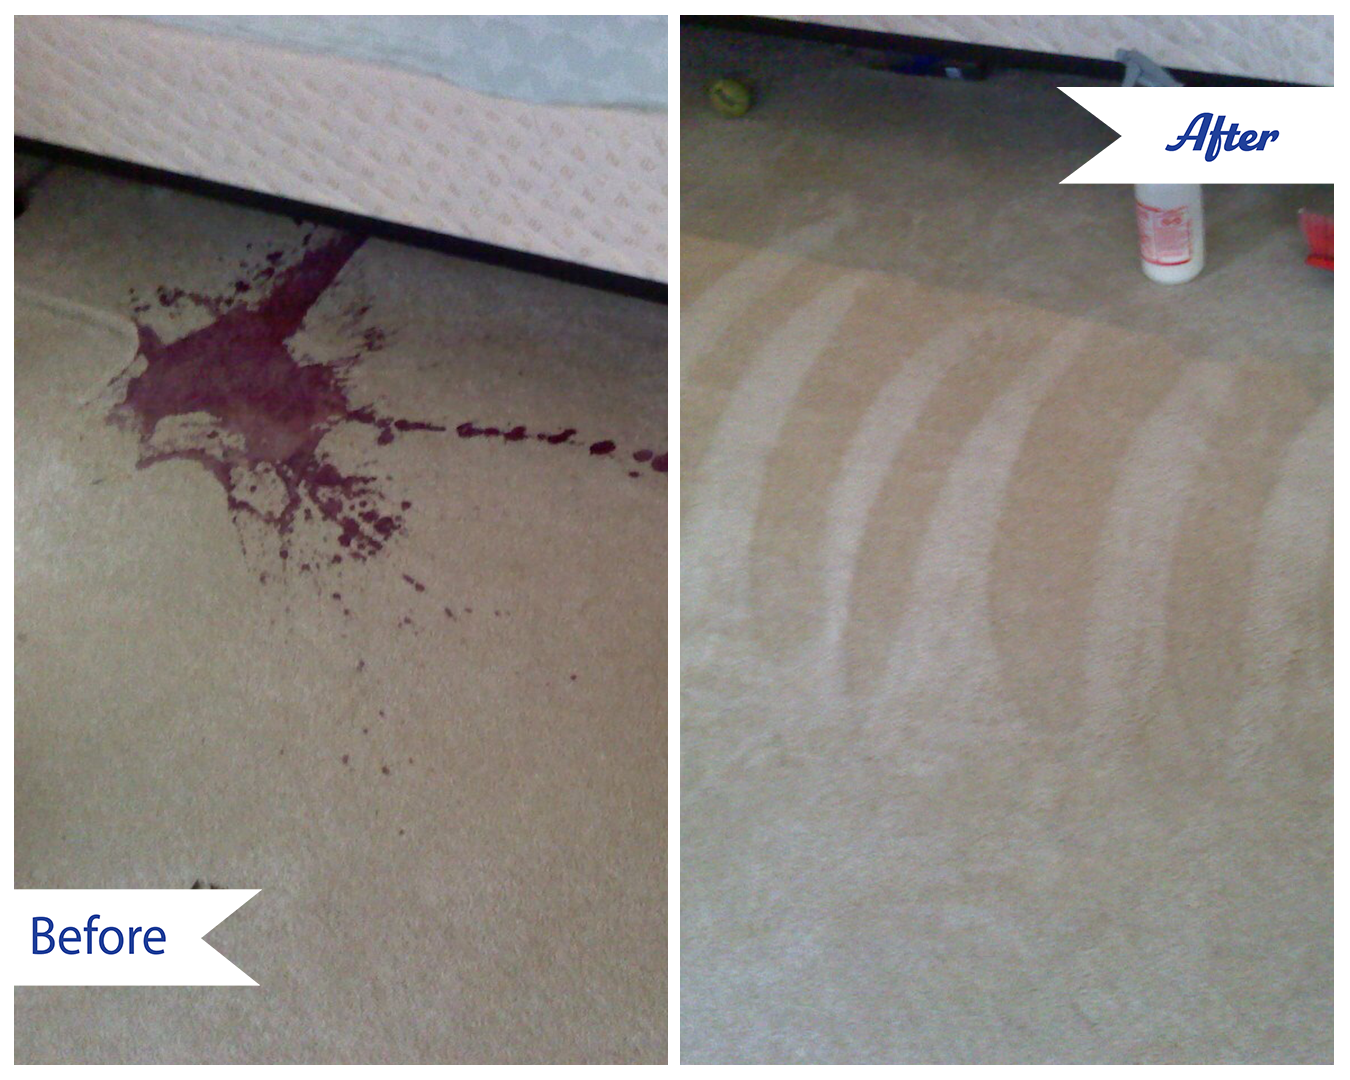 Carpet cleaning in Annapolis and the surrounding area